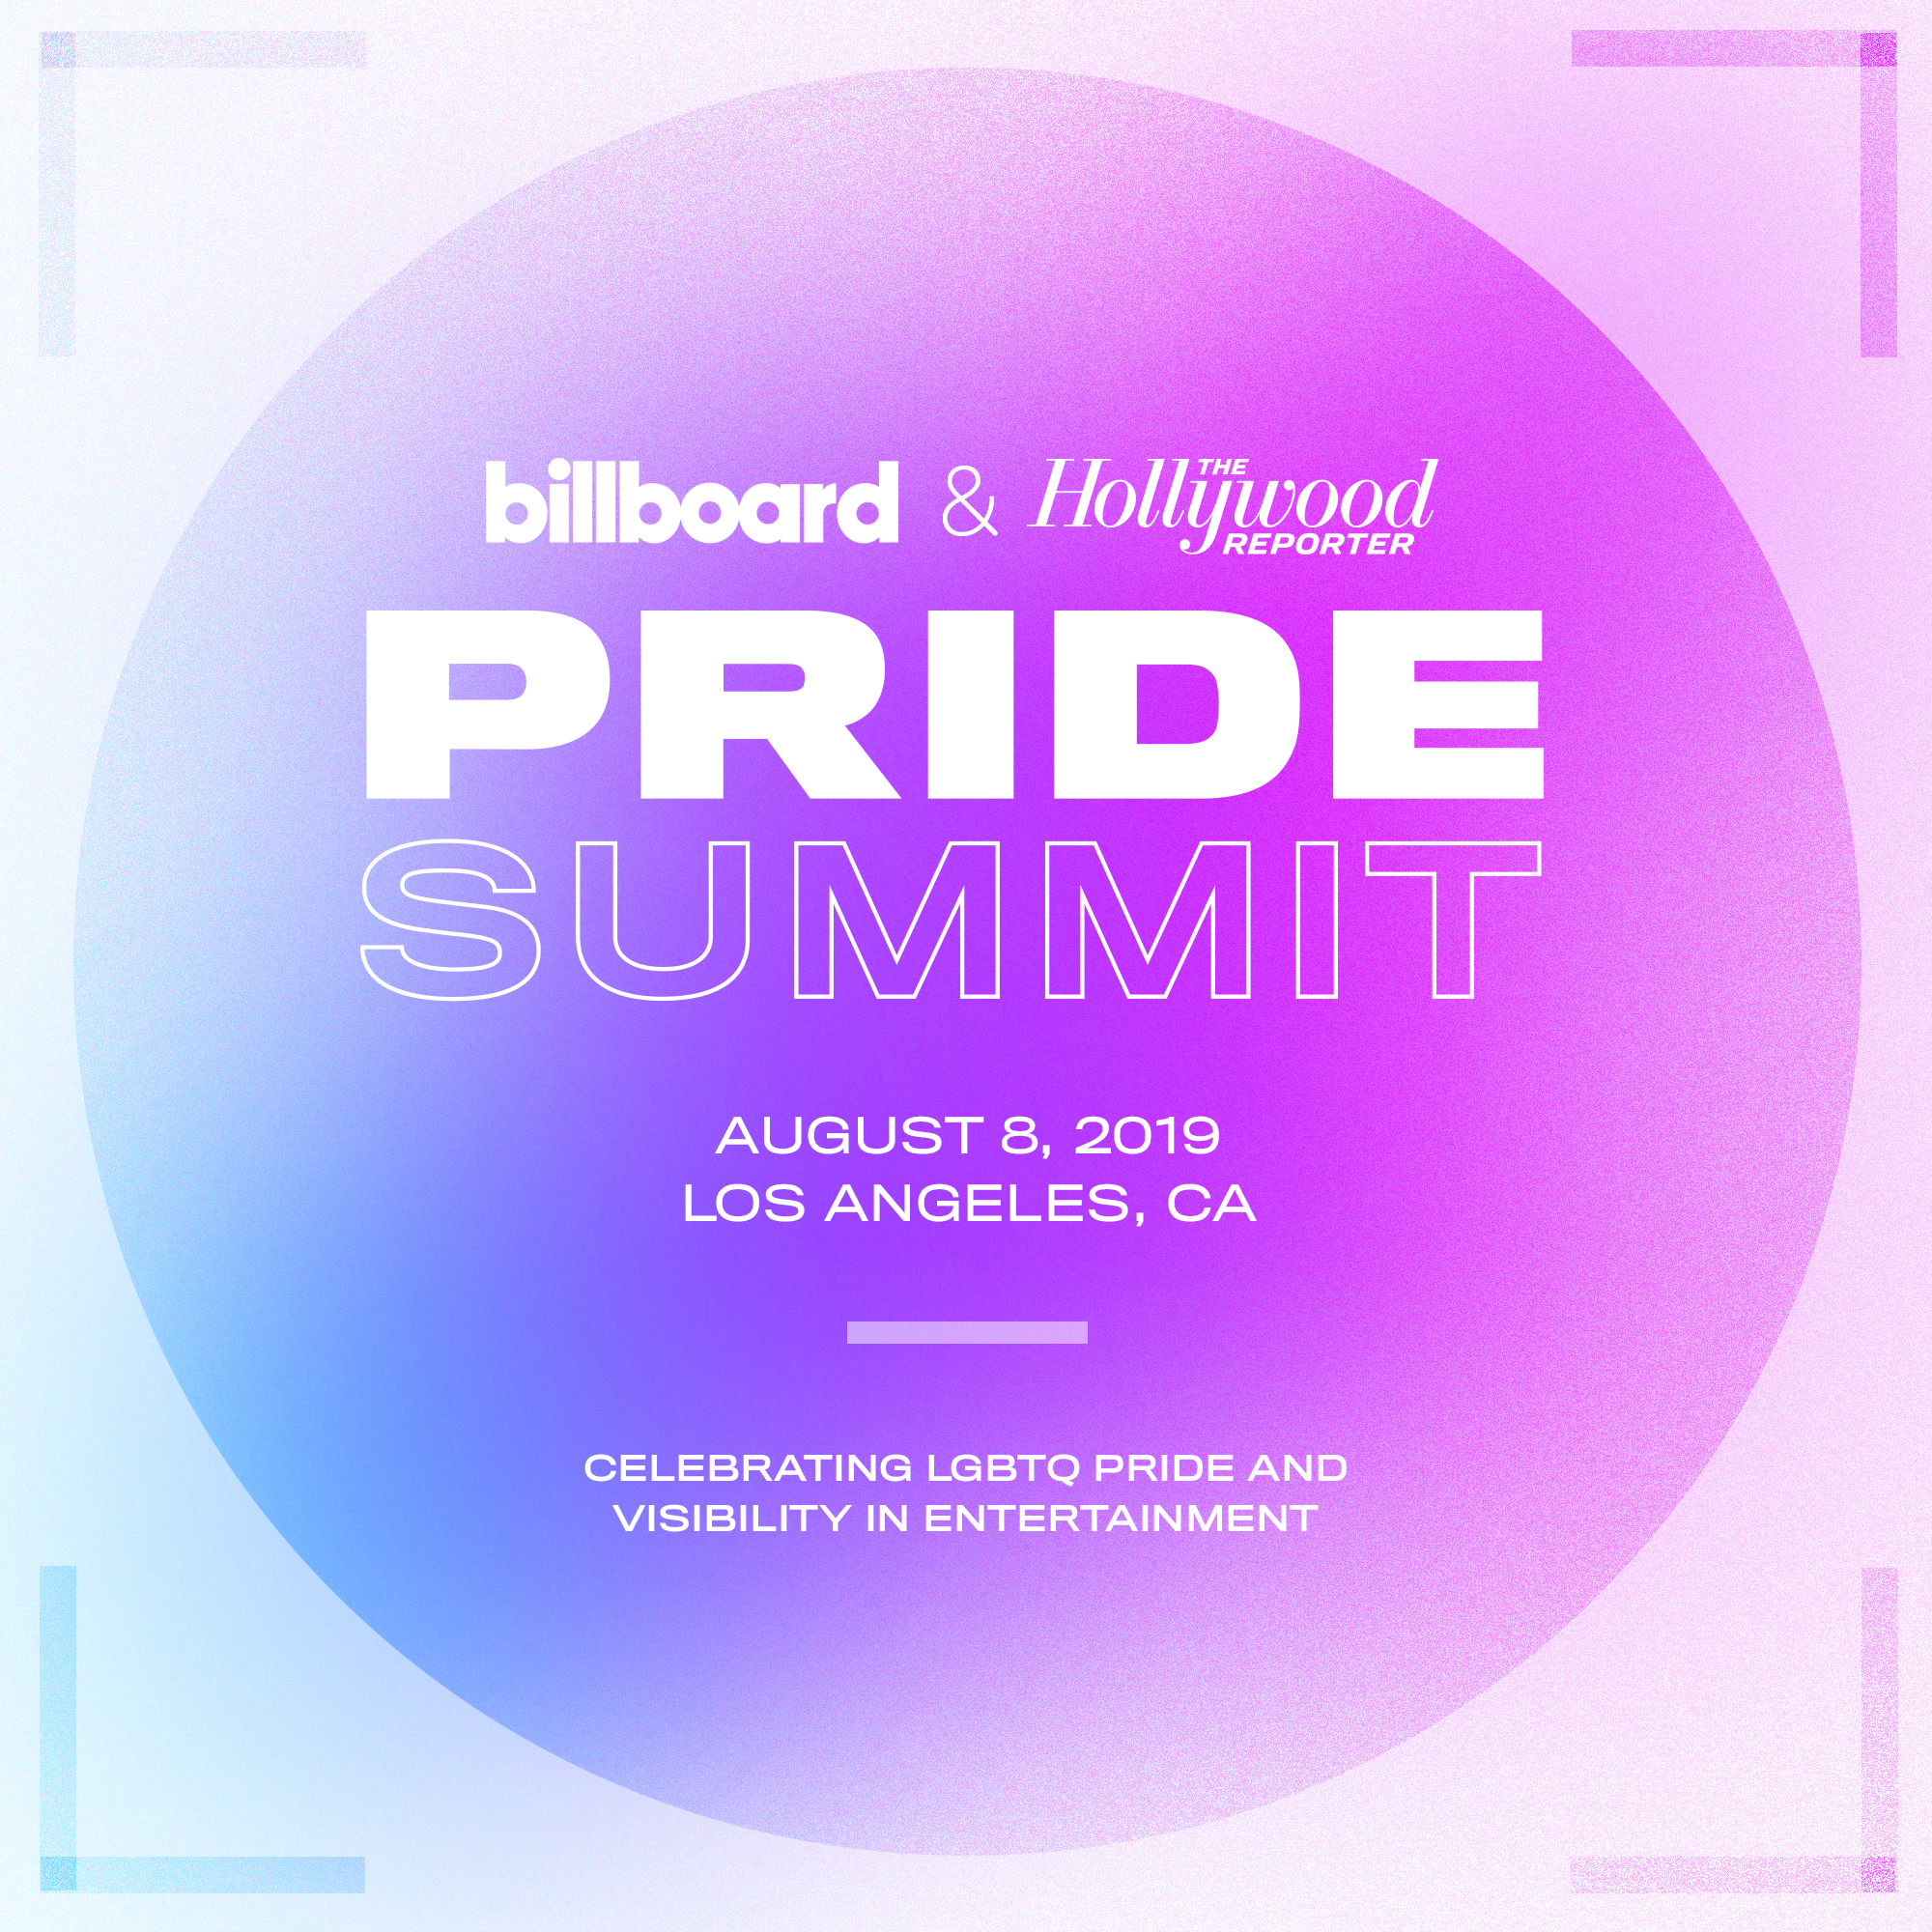 Billboard and The Hollywood Reporter Announce Inaugural Pride Summit in L.A.